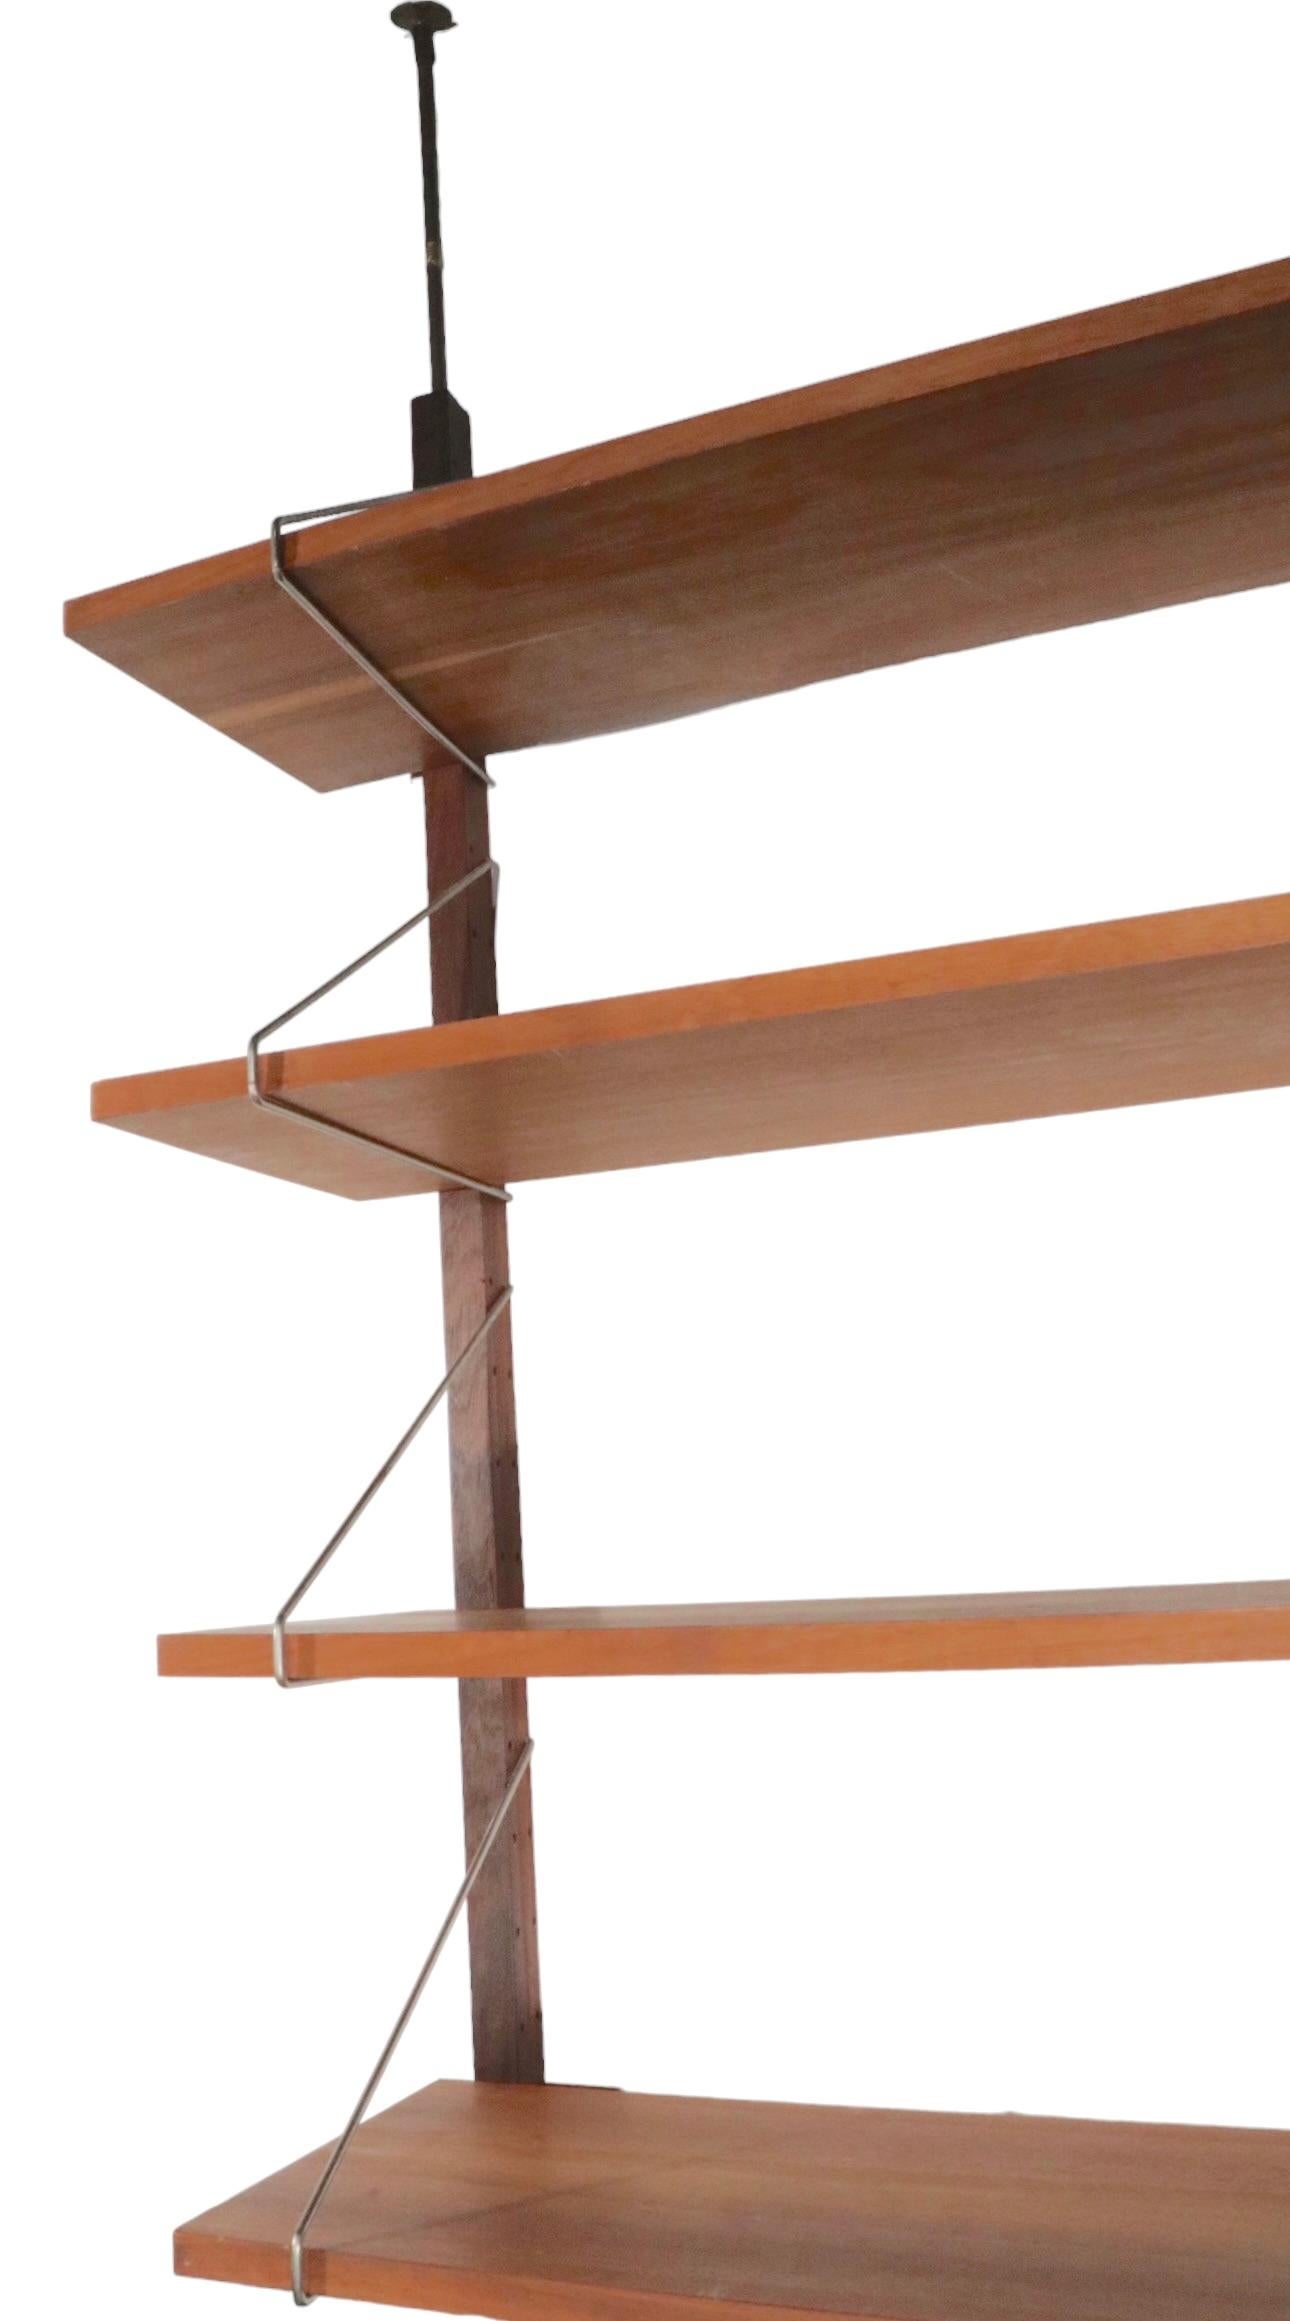 20th Century Danish Mid Century Wall Unit with 8 Shelves, circa 1950 - 1960s For Sale